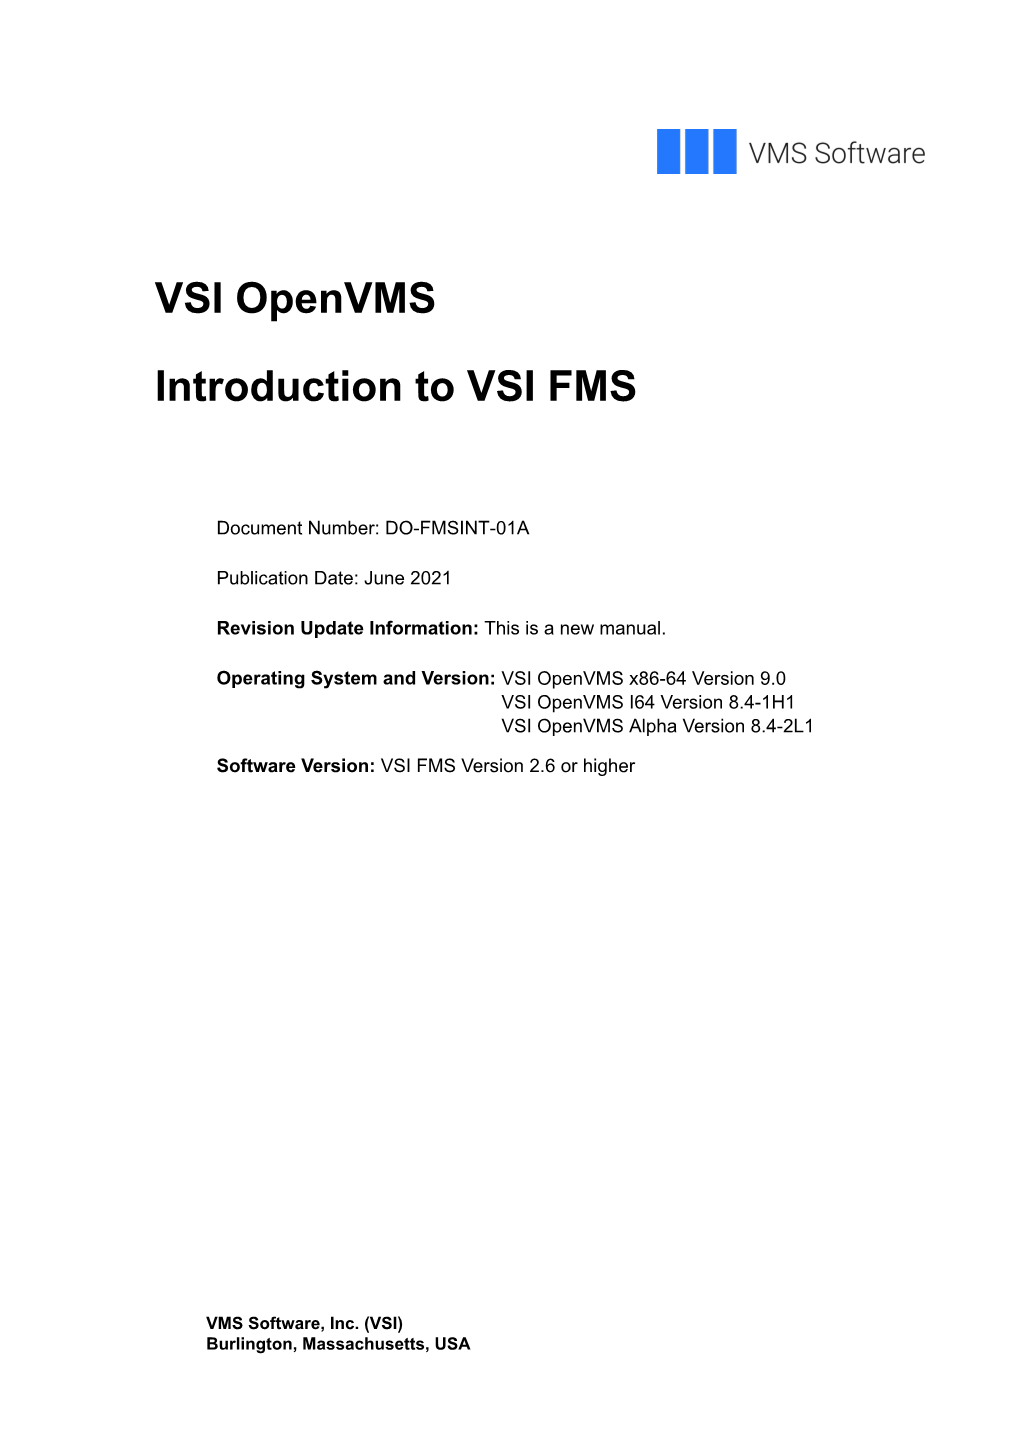 Introduction to VSI FMS